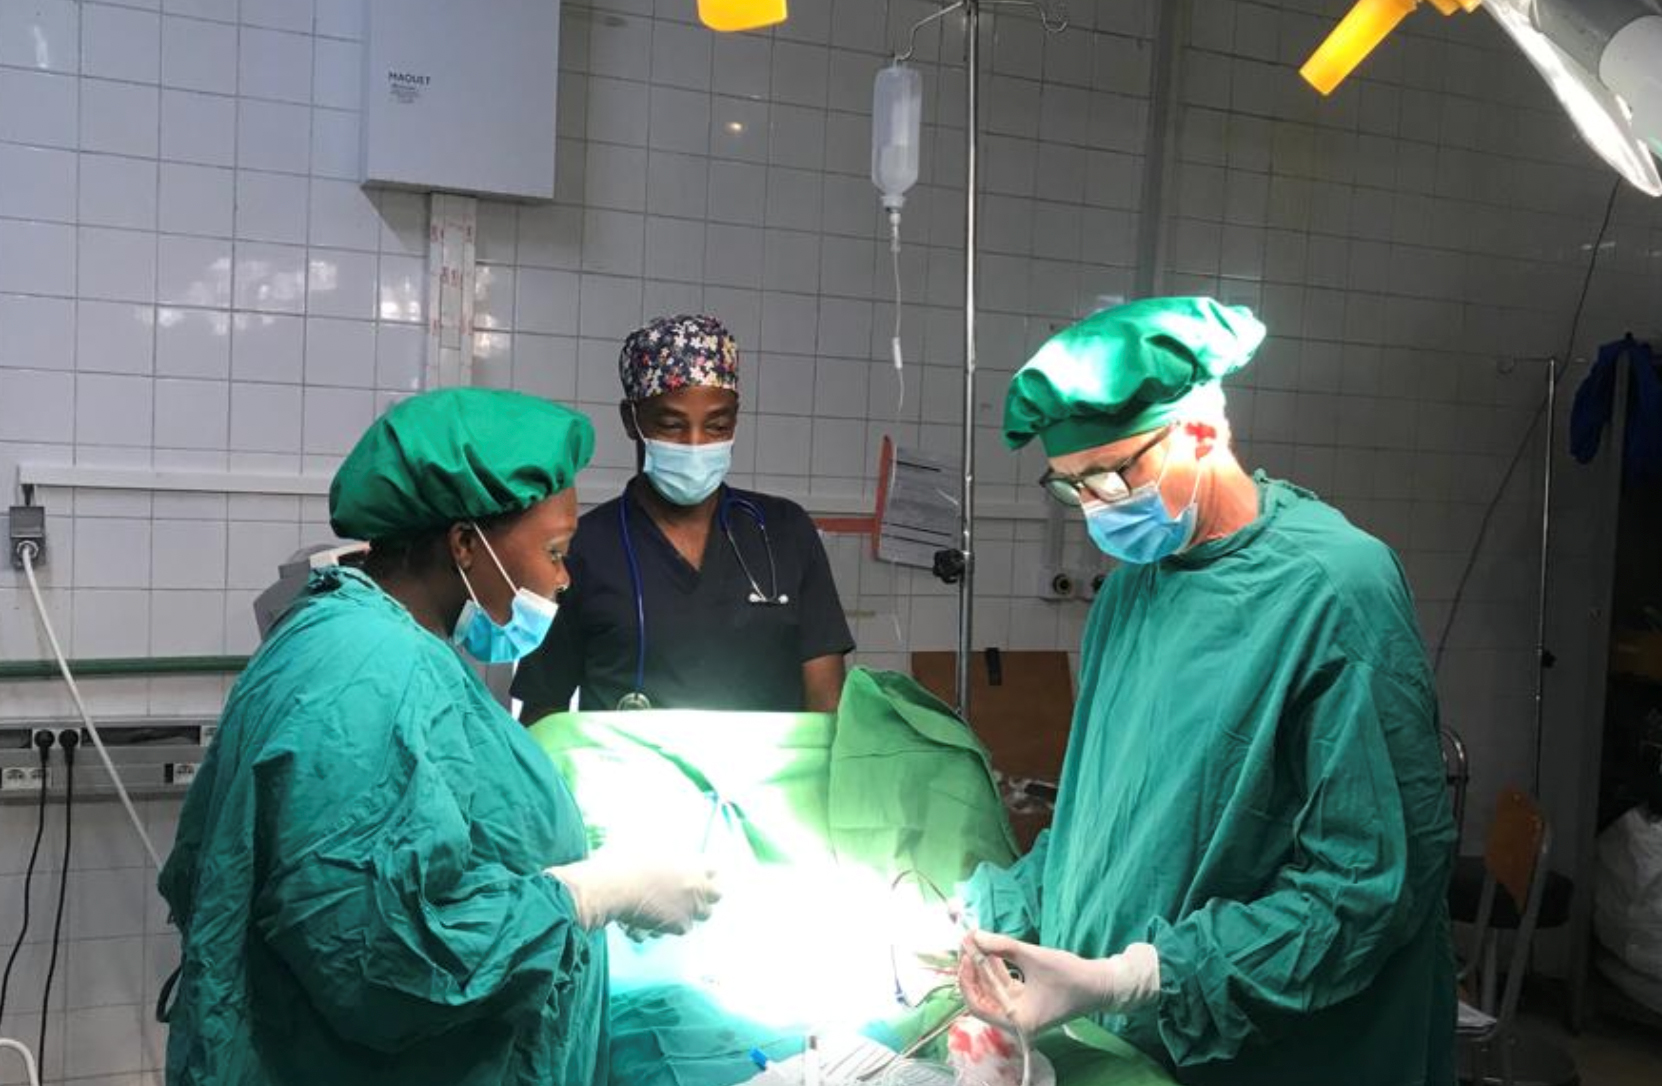 Dr. Bradley and the fellows in the OR